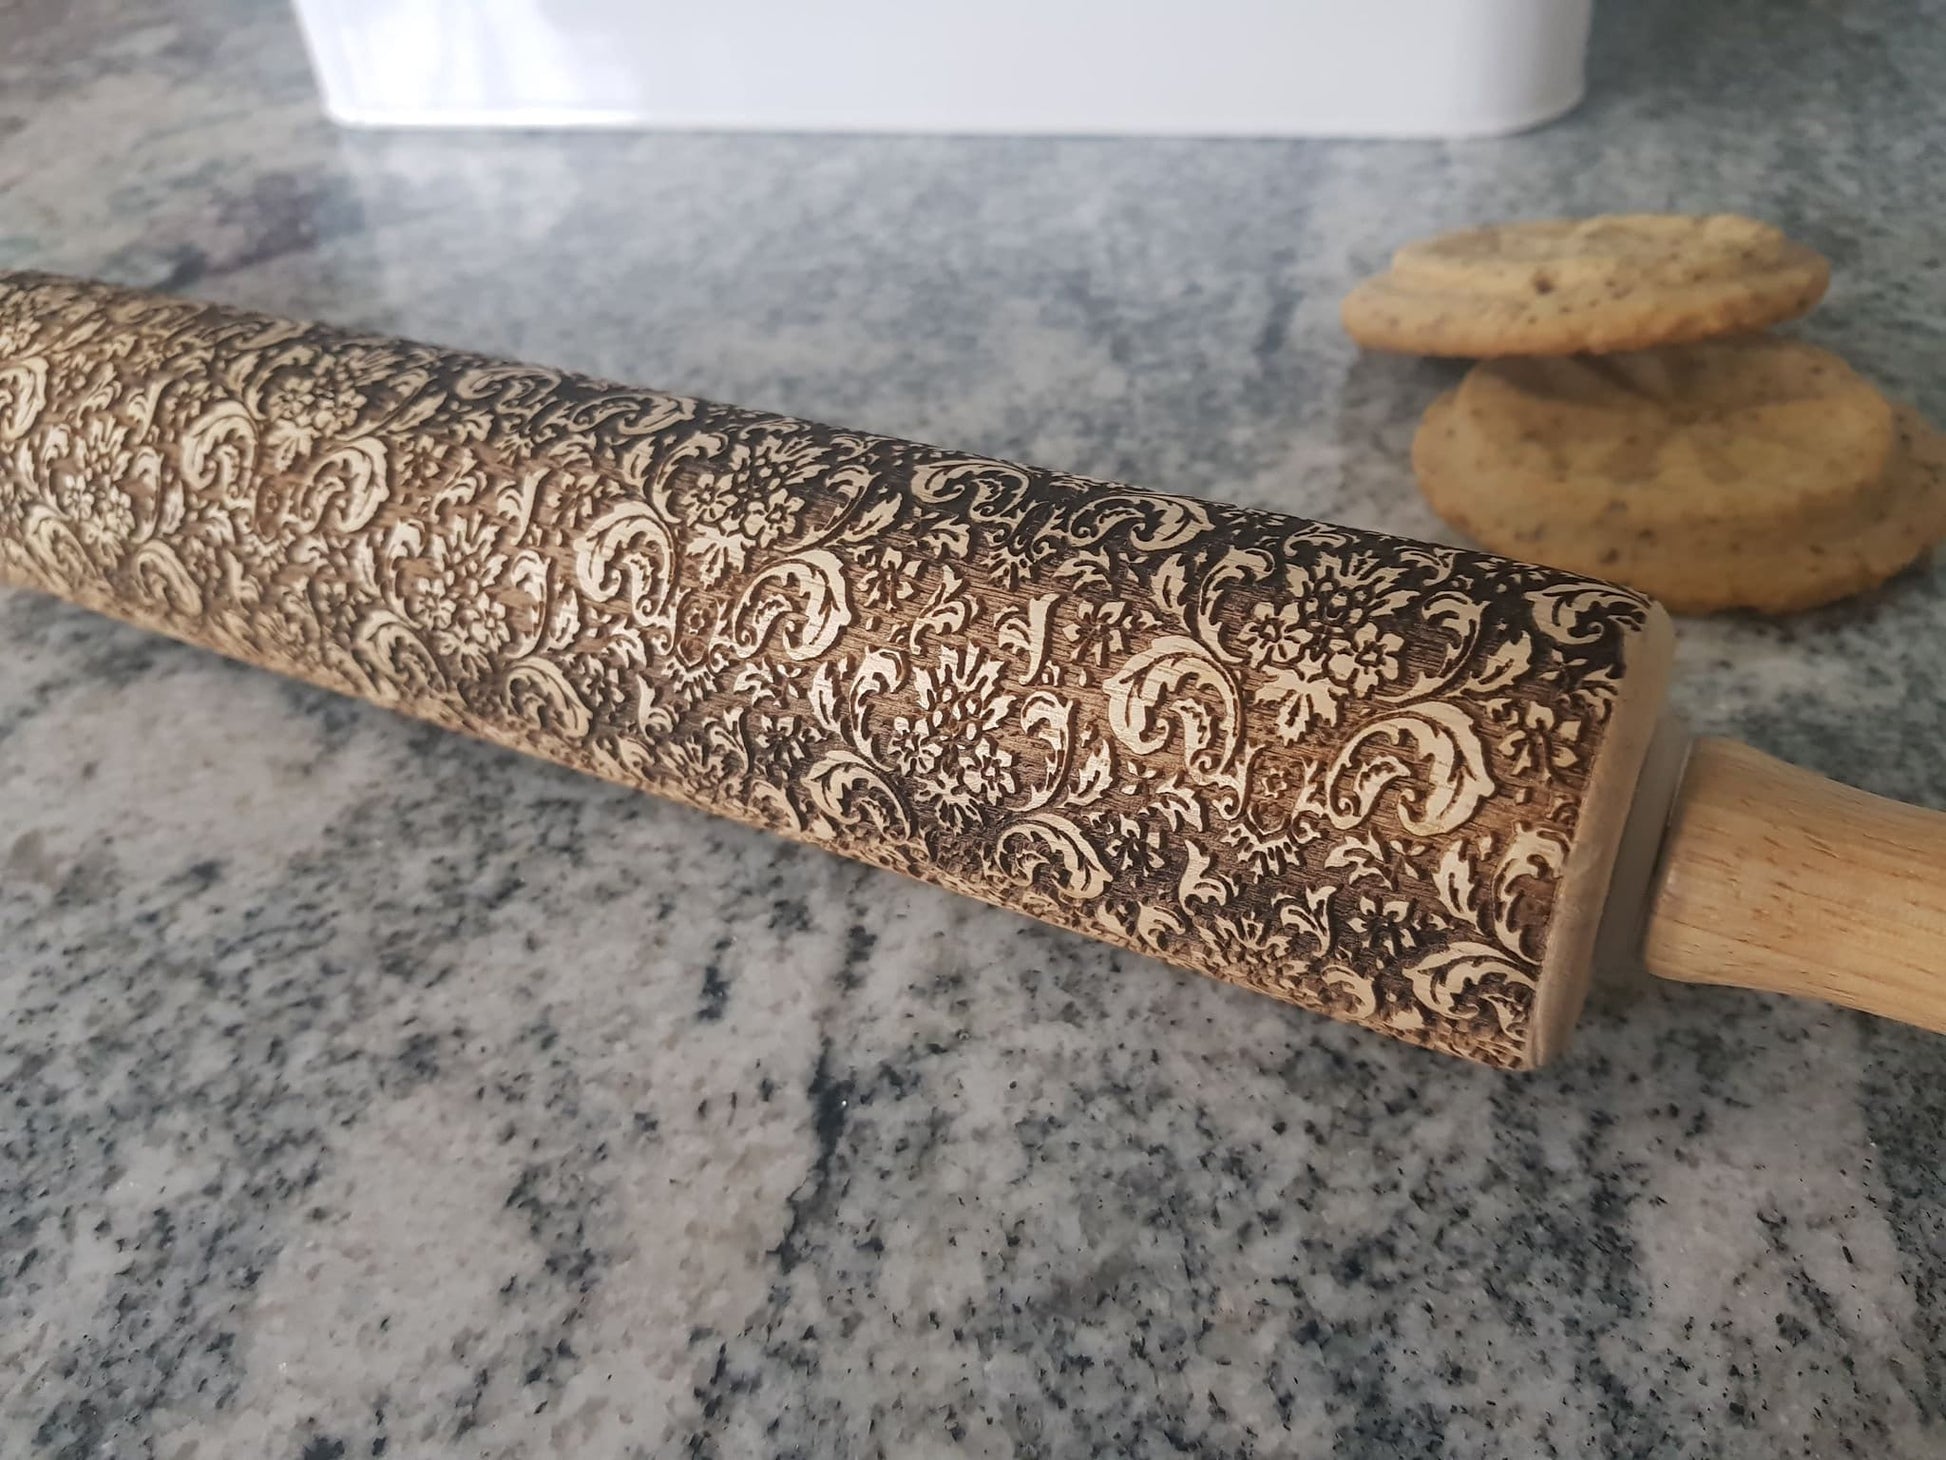 Flourish, Texture, Embossed, Engraved, Wooden Rolling Pin, Cookie